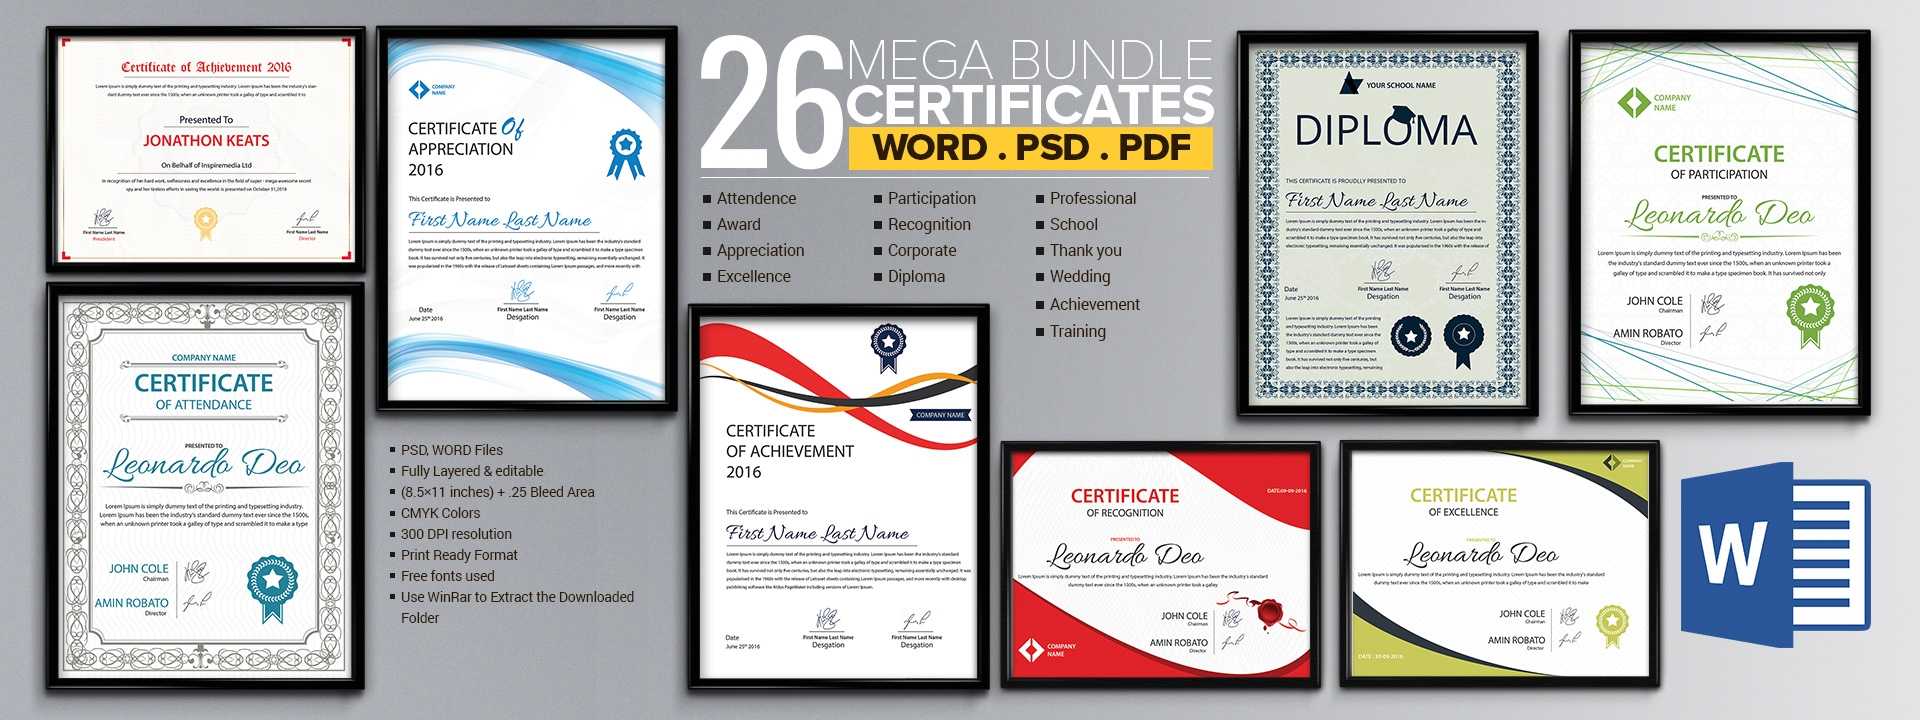 Word Certificate Template – 53+ Free Download Samples Intended For Free Certificate Templates For Word 2007